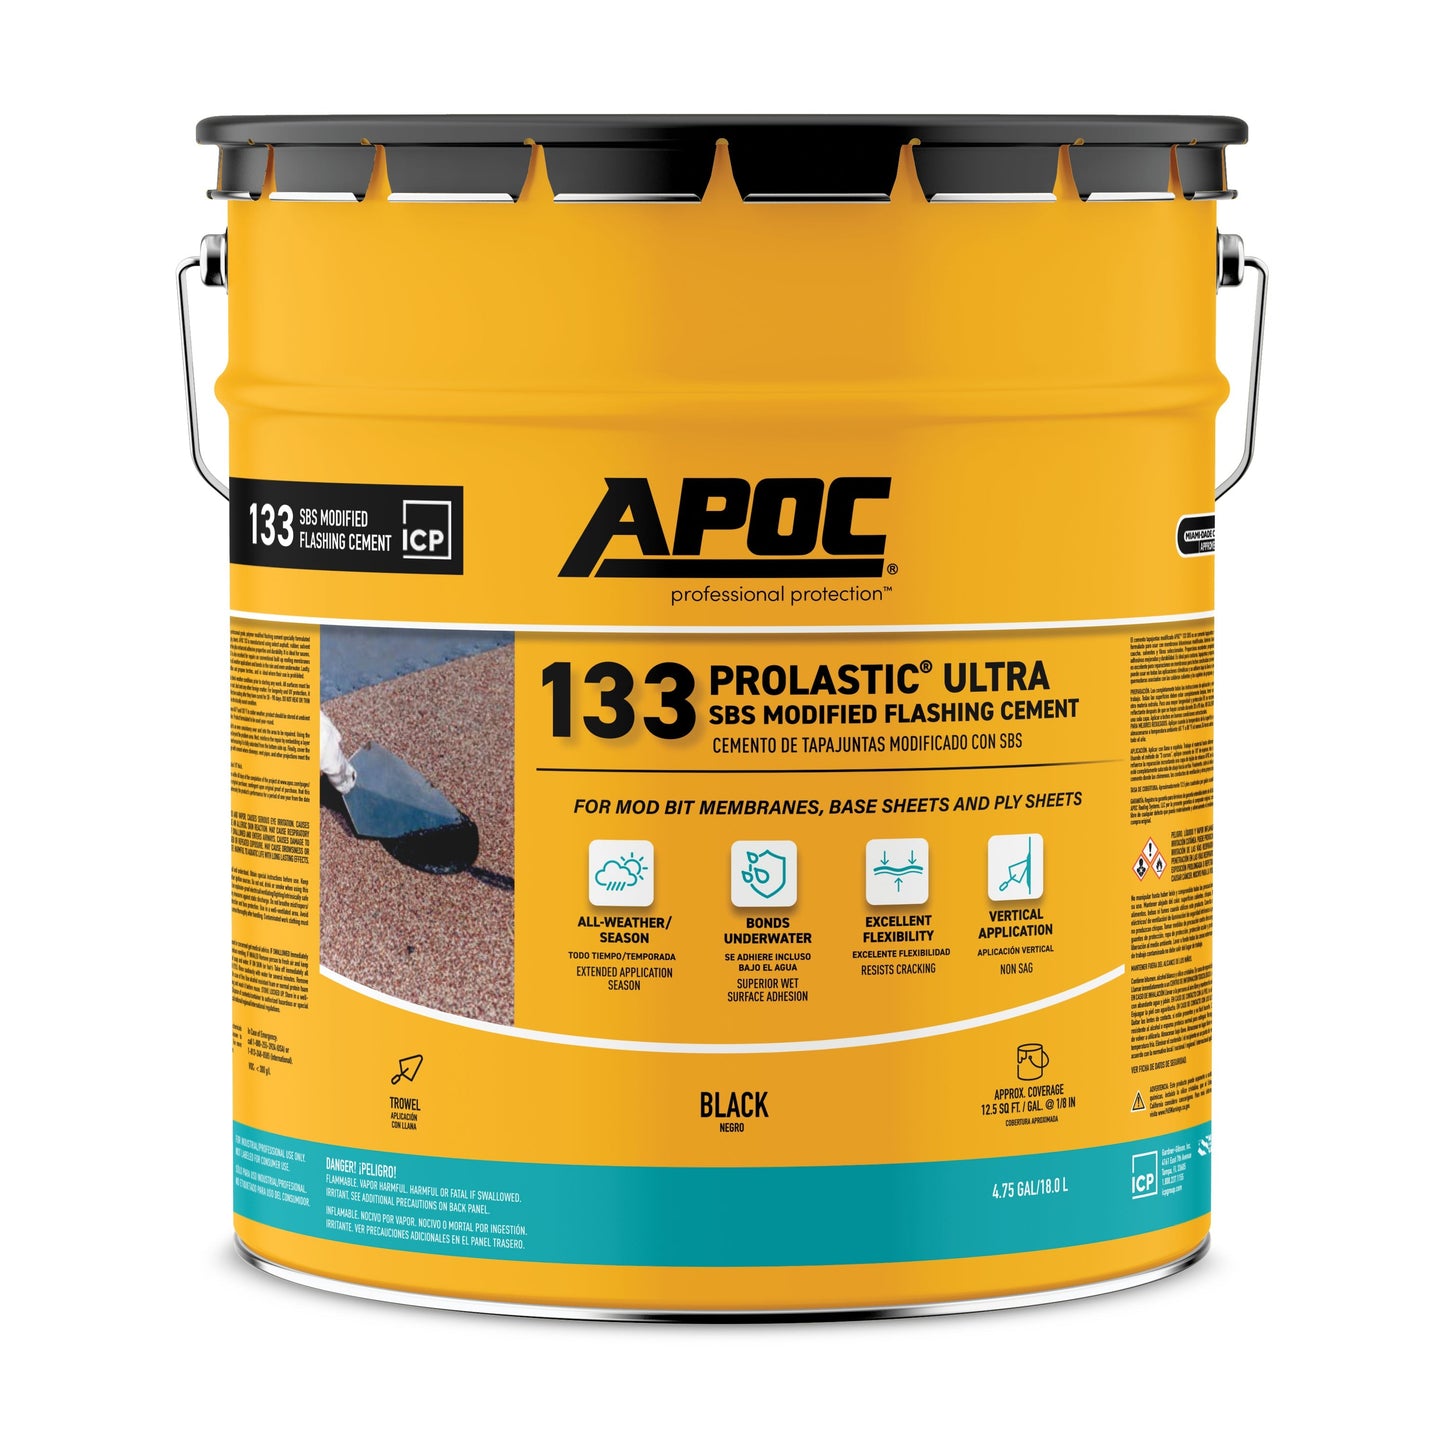 APOC<sup>®</sup> 133 Prolastic<sup>®</sup> Ultra SBS Modified Flashing Cement